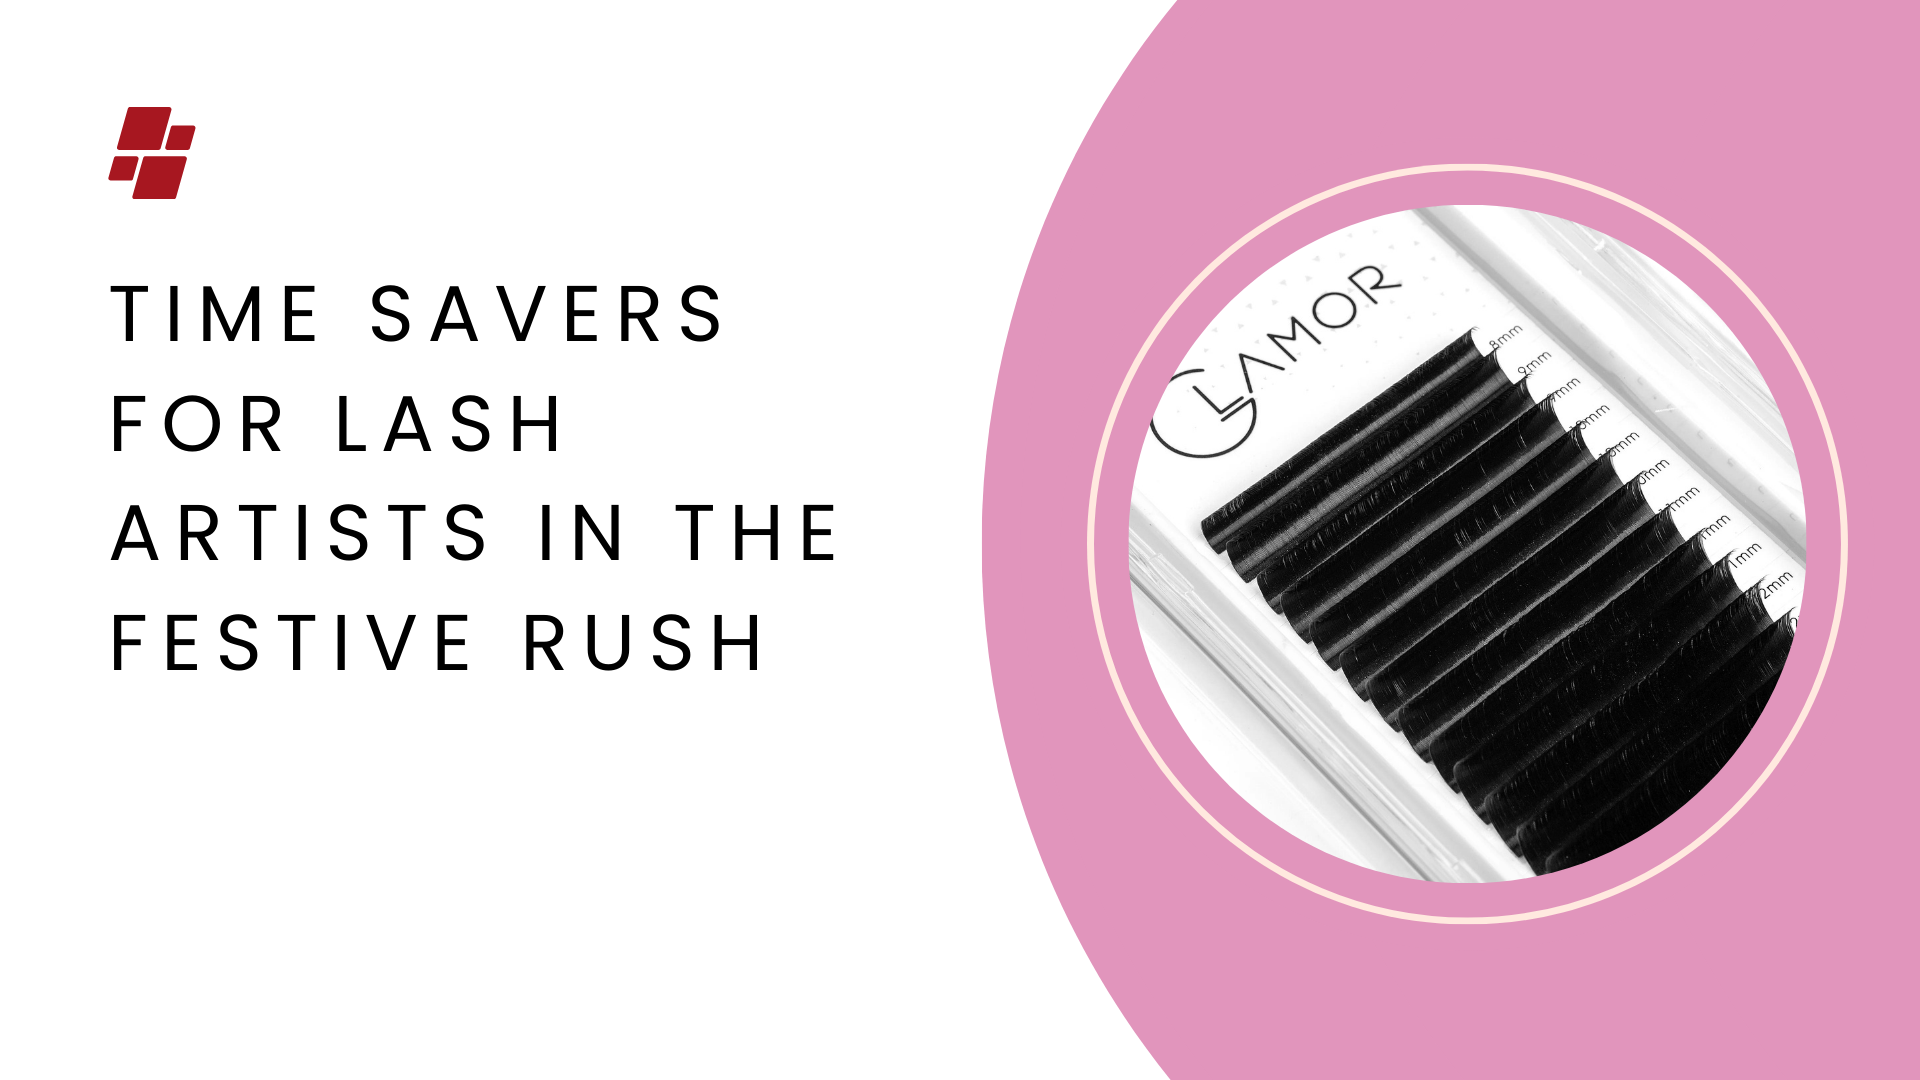 Time savers for lash artists in the festive rush